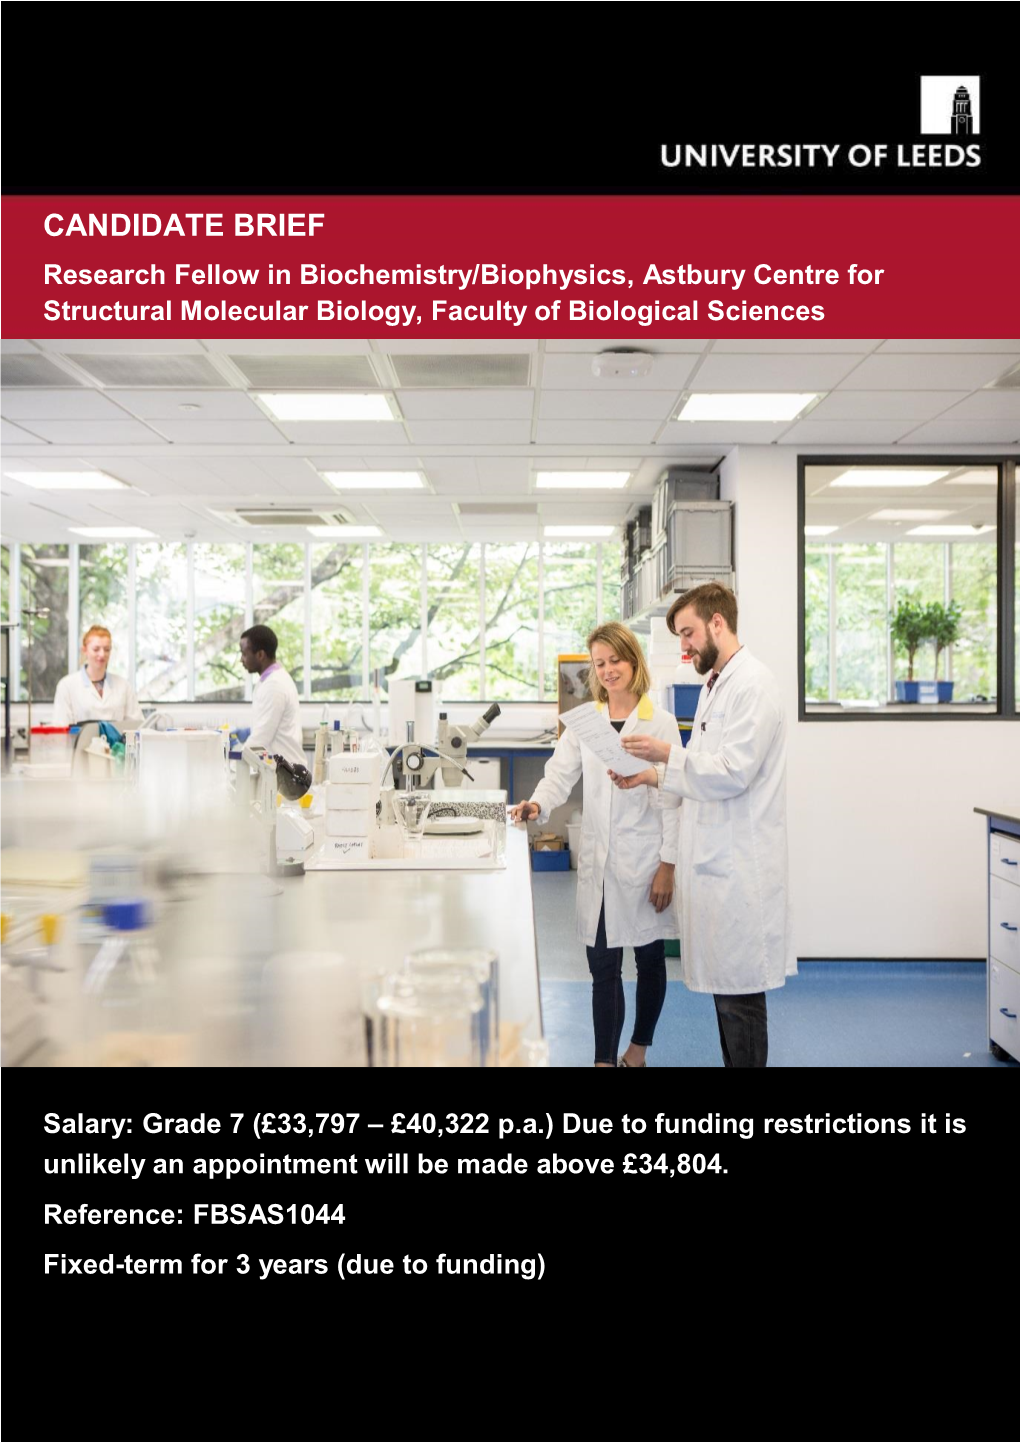 Post-Doctoral Research Fellow in Biochemistry/Biophysics Astbury Centre for Structural Molecular Biology, School of Molecular and Cellular Biology